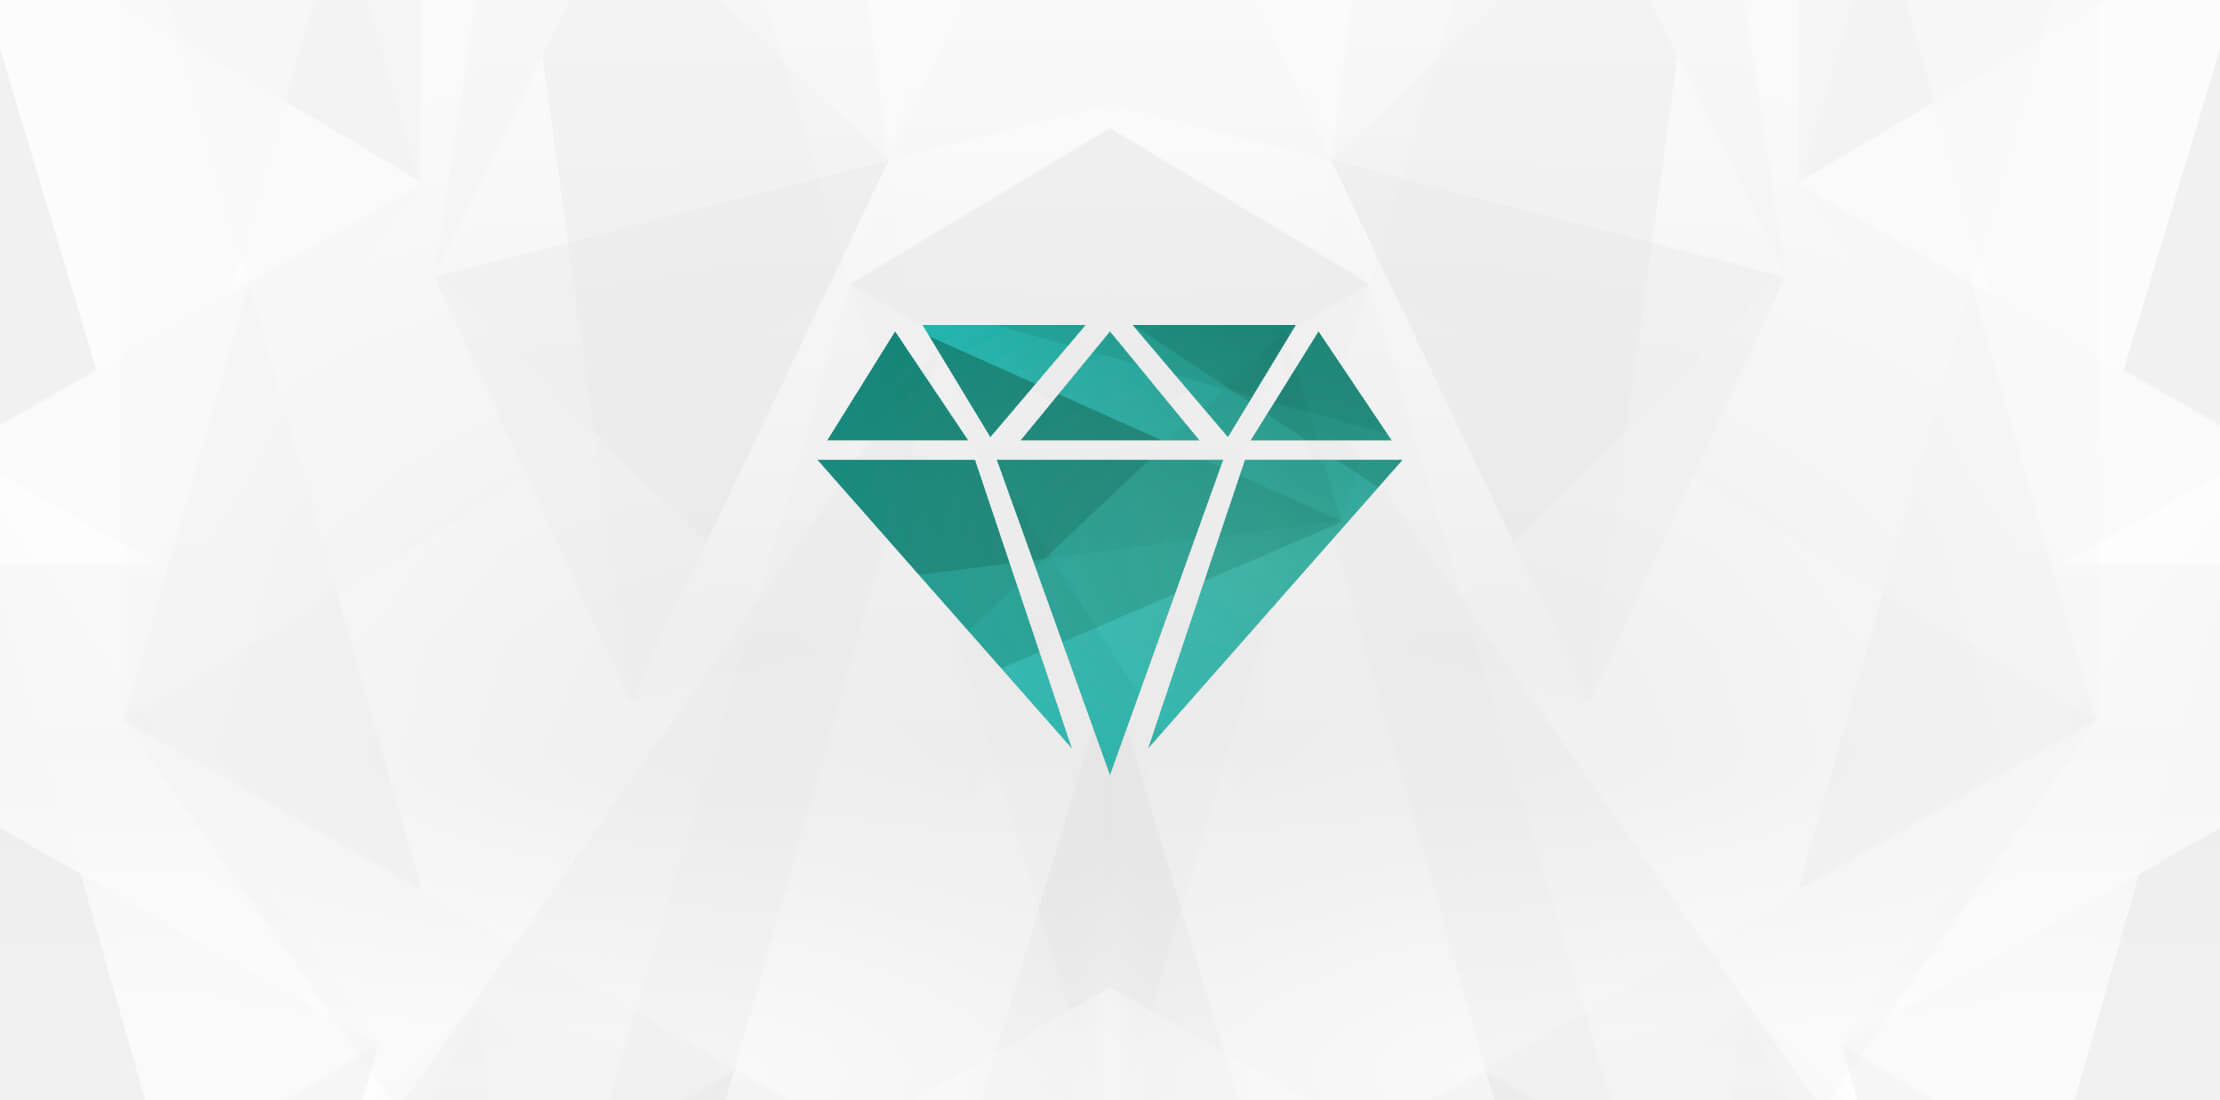 Simple vector shape of a diamond, coloured emerald green and split into triangles on a geometric light sand background